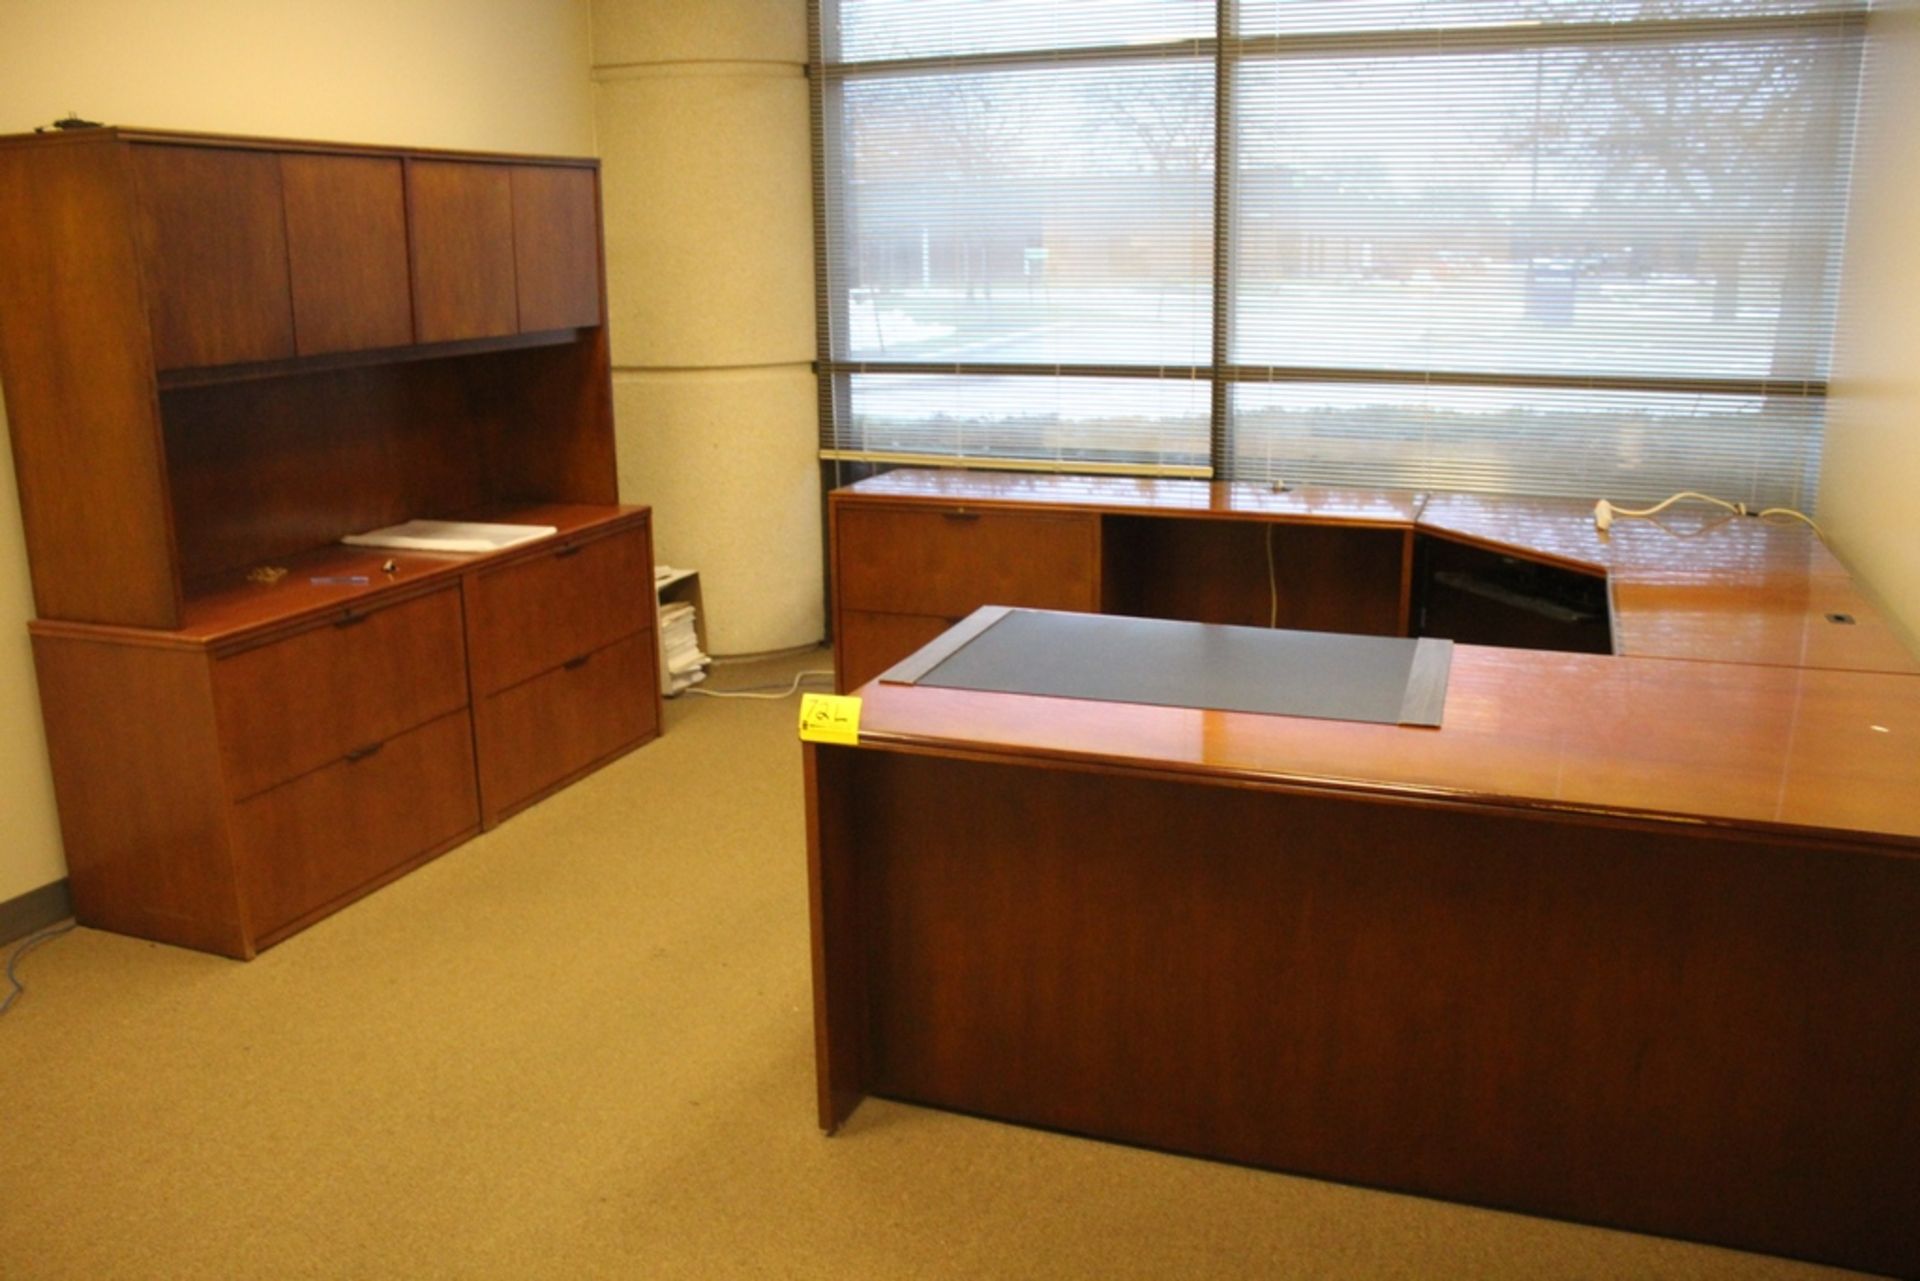 U-SHAPED OFFICE DESK, 114" X 72" WITH CREDENZA